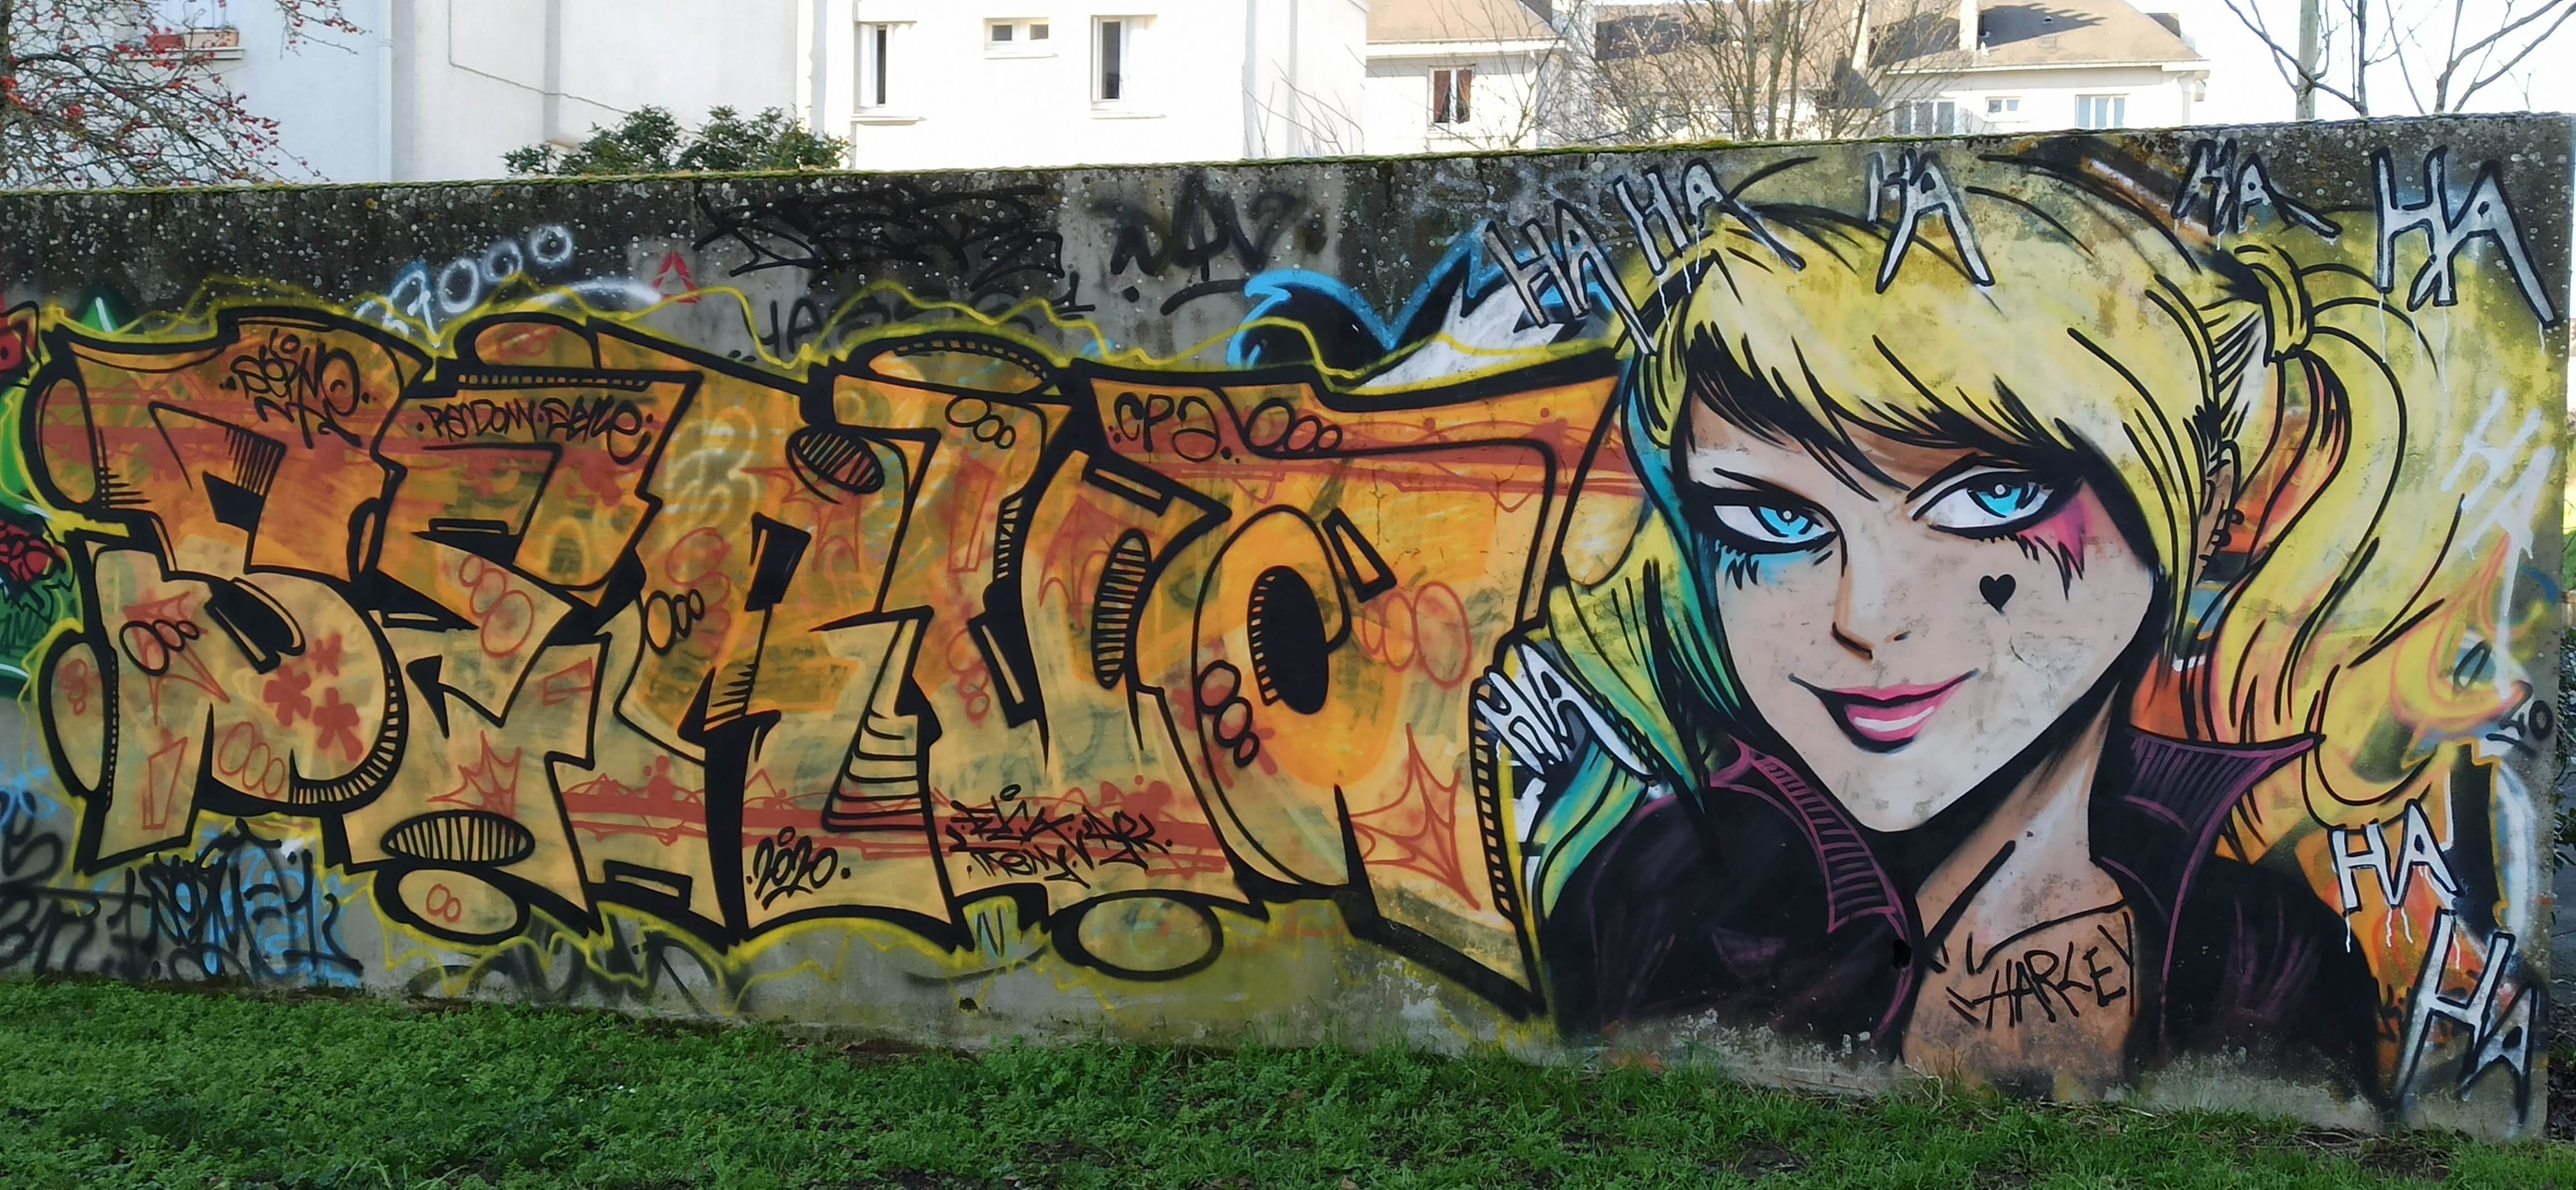 Graffiti 4703 Harley Queen captured by Rabot in Nantes France